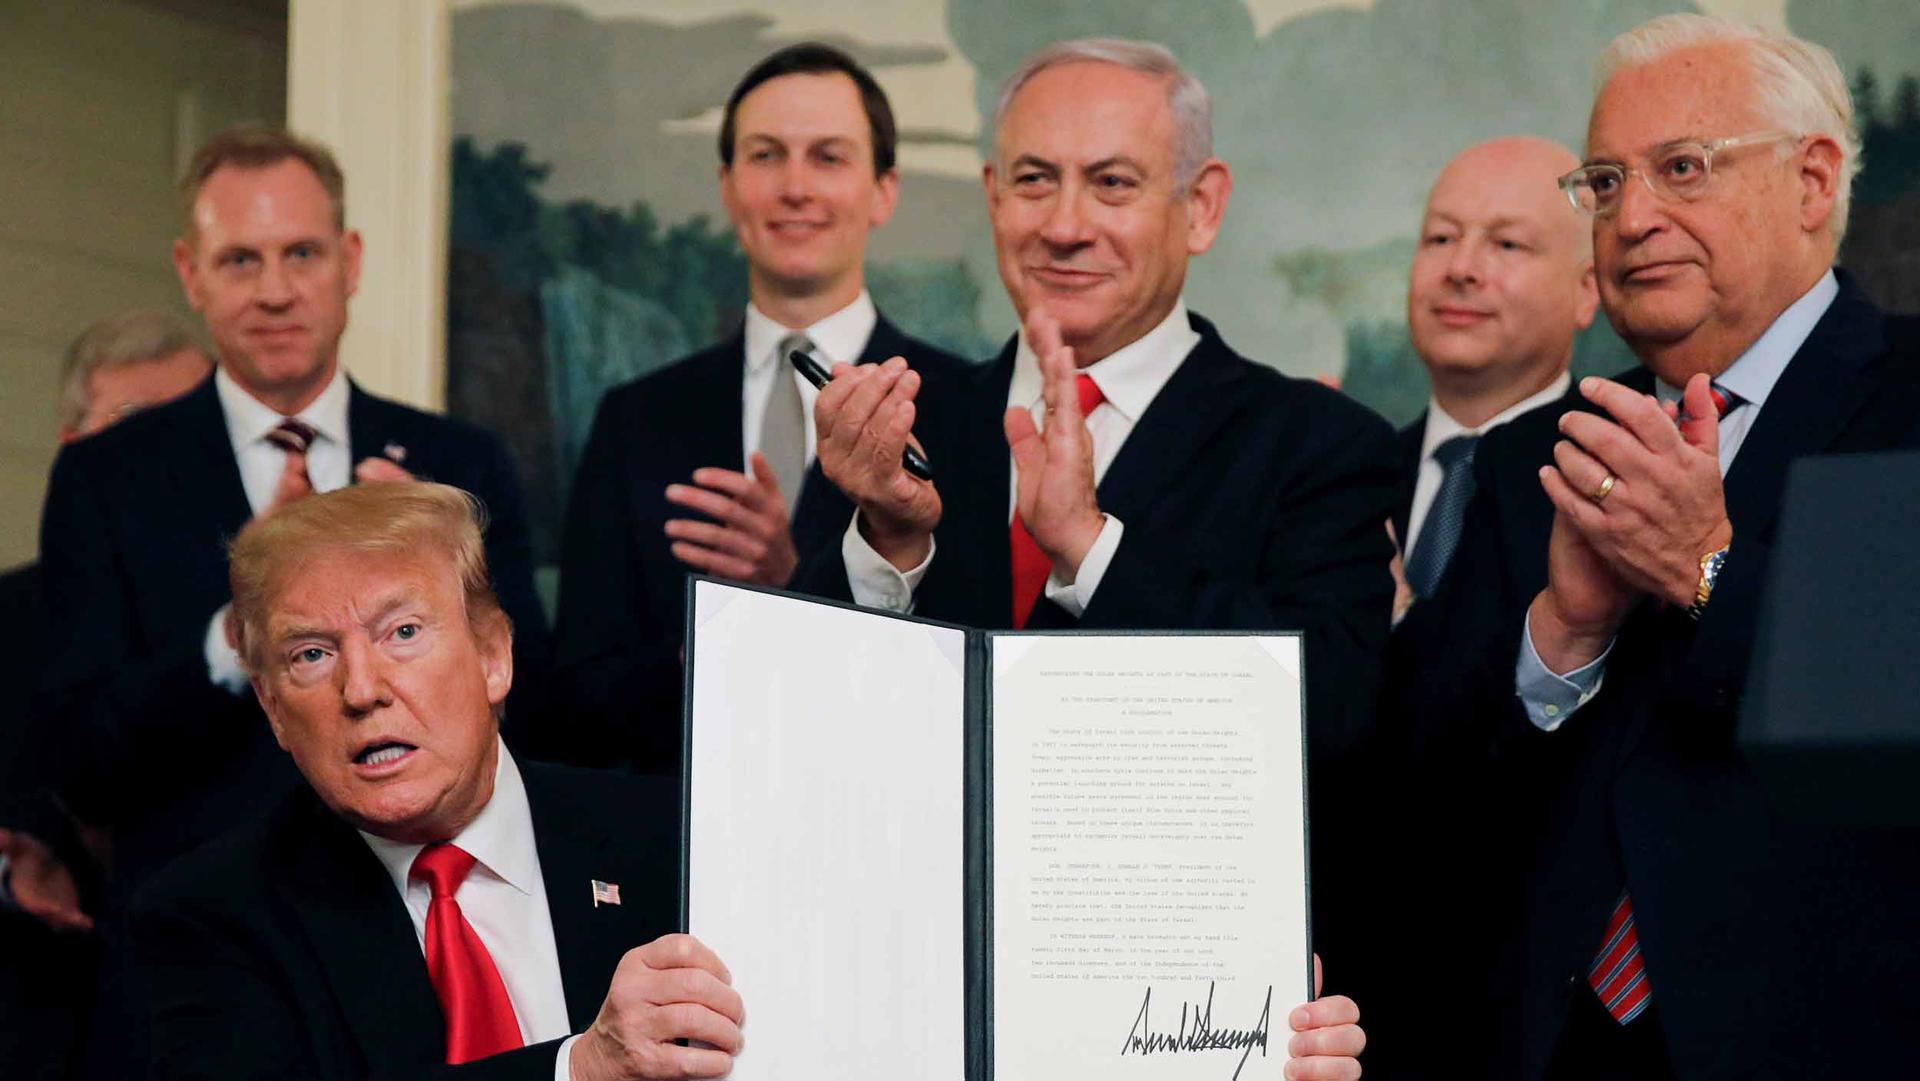 Donald Trump sits and holds up a signed proclamation while flanked by Israeli Prime Minister Benjamin Netanyahu and Jared Kushner